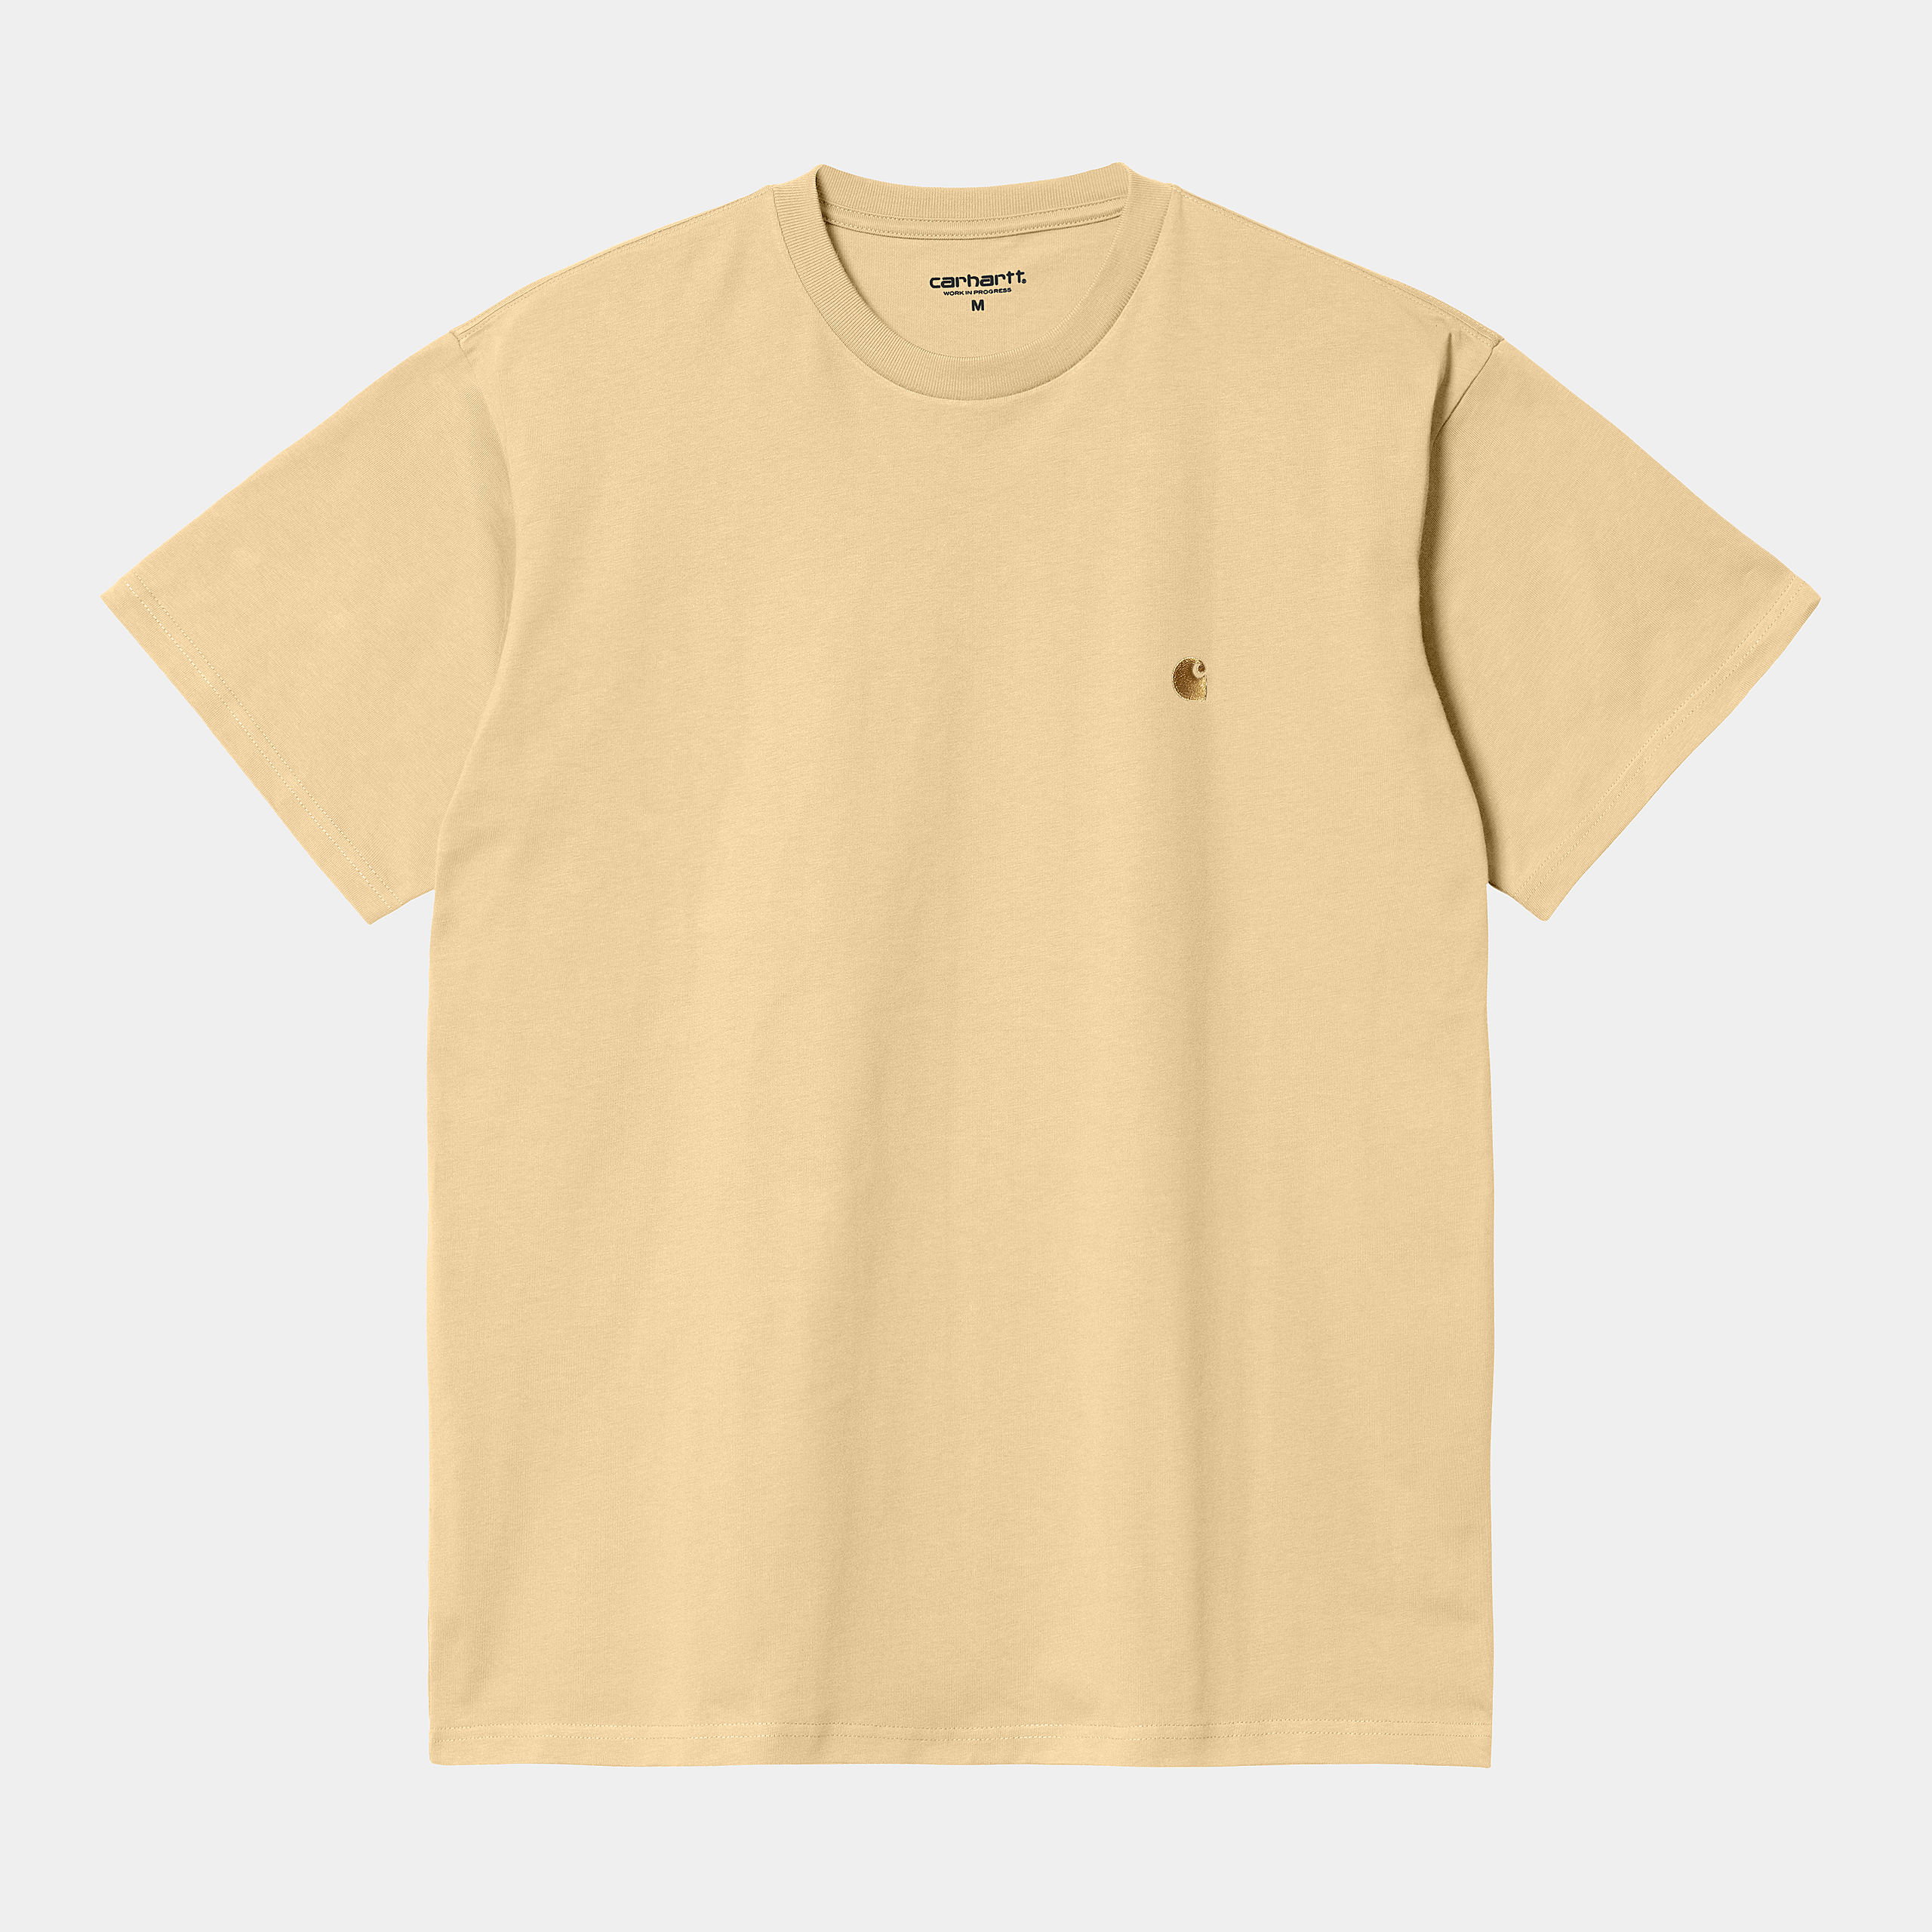 Carhartt WIP - CHASE T-SHIRT - Citron/Gold